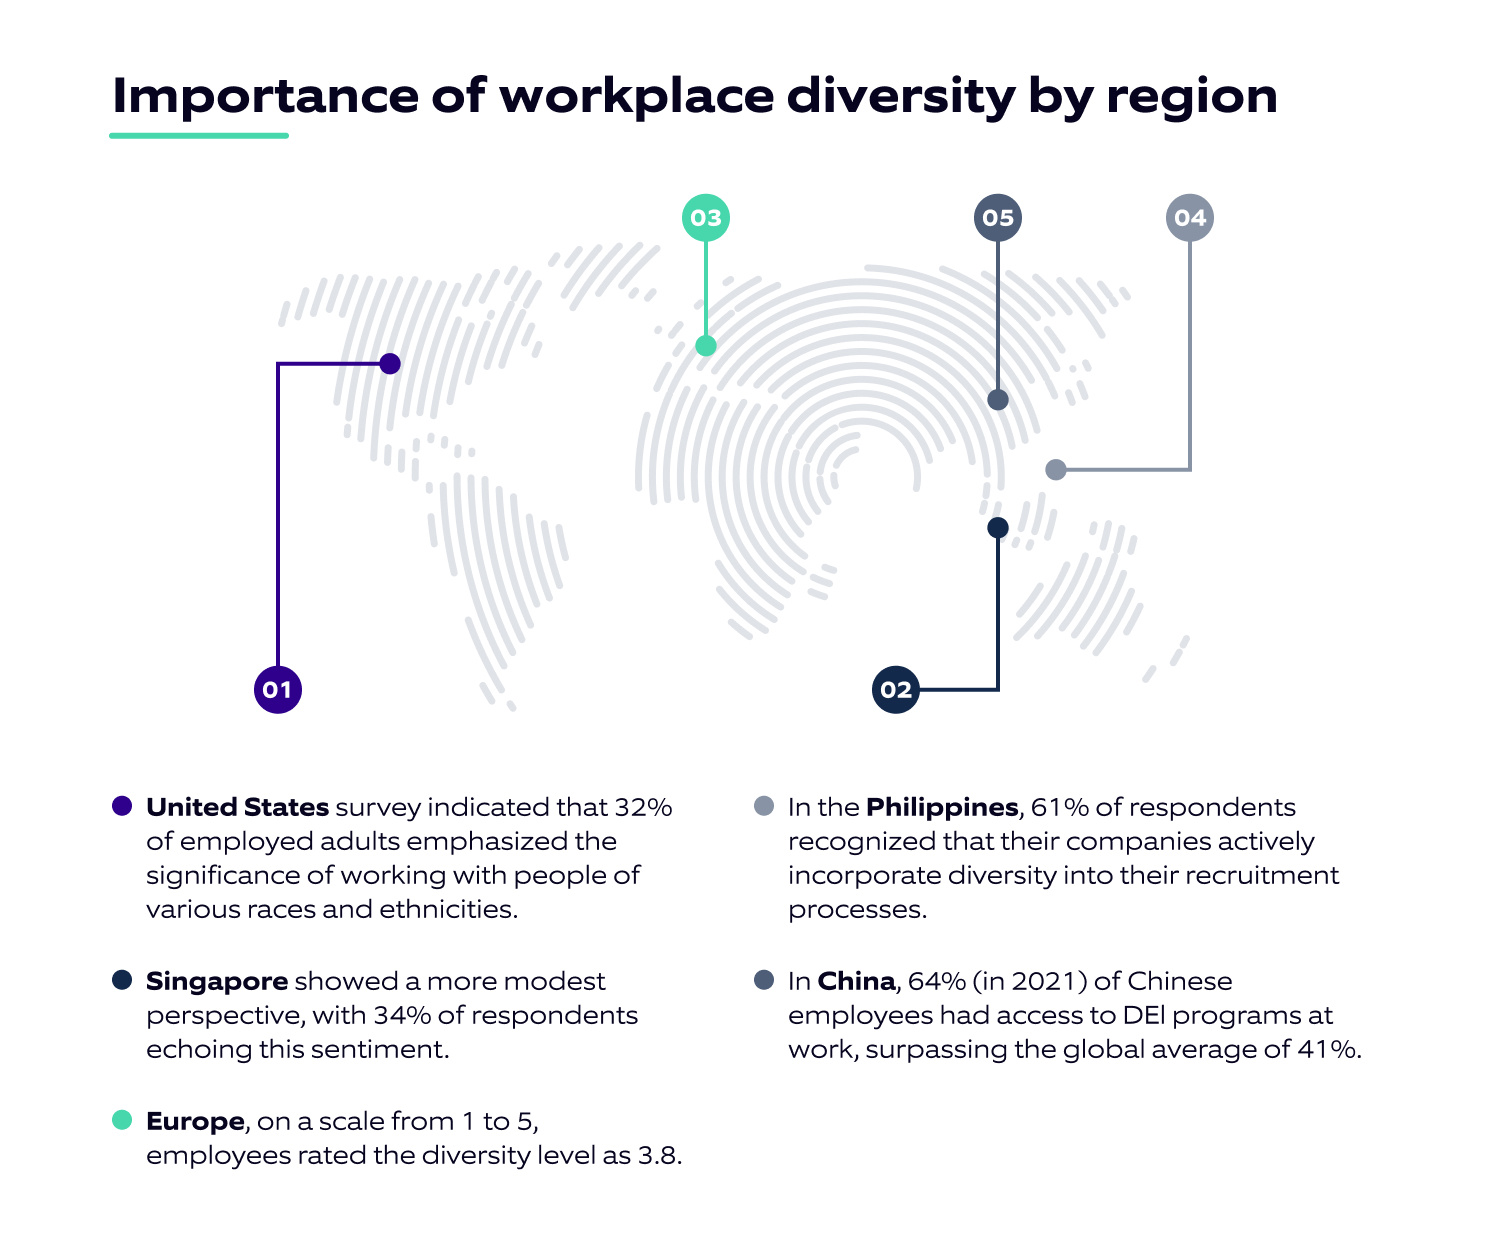 Infographic displaying importance of workplace diversity for selected regions